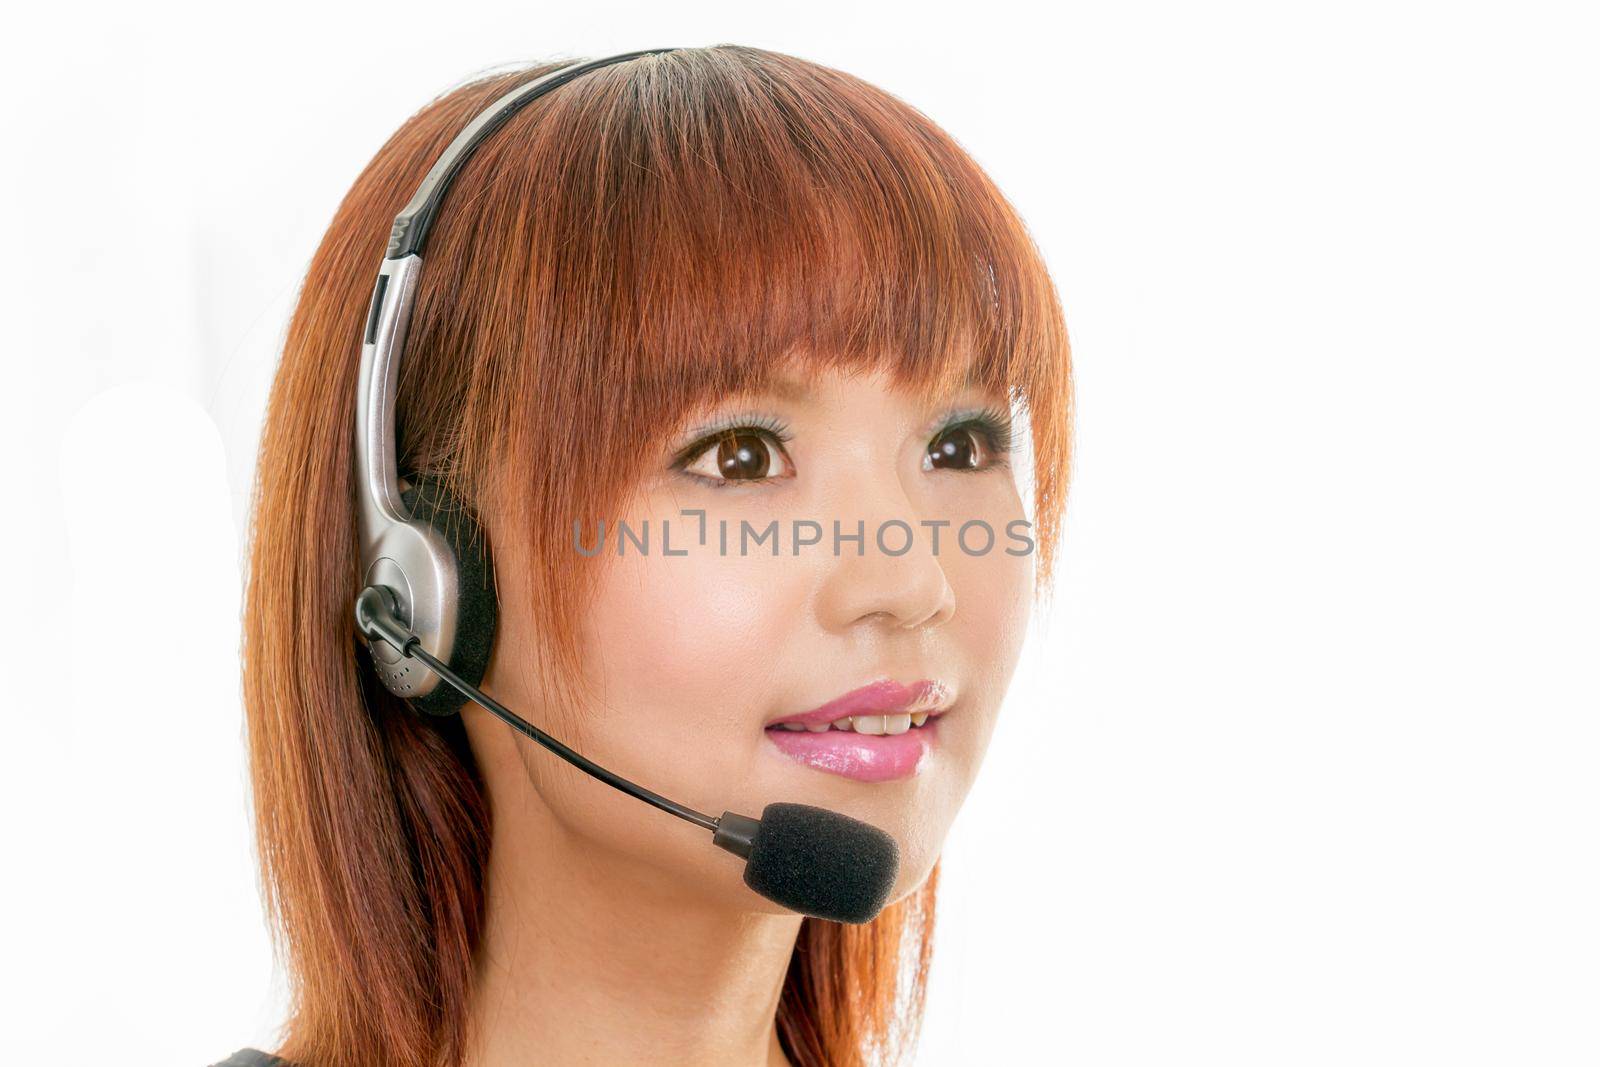 Chinese female wearing a headset with microphone